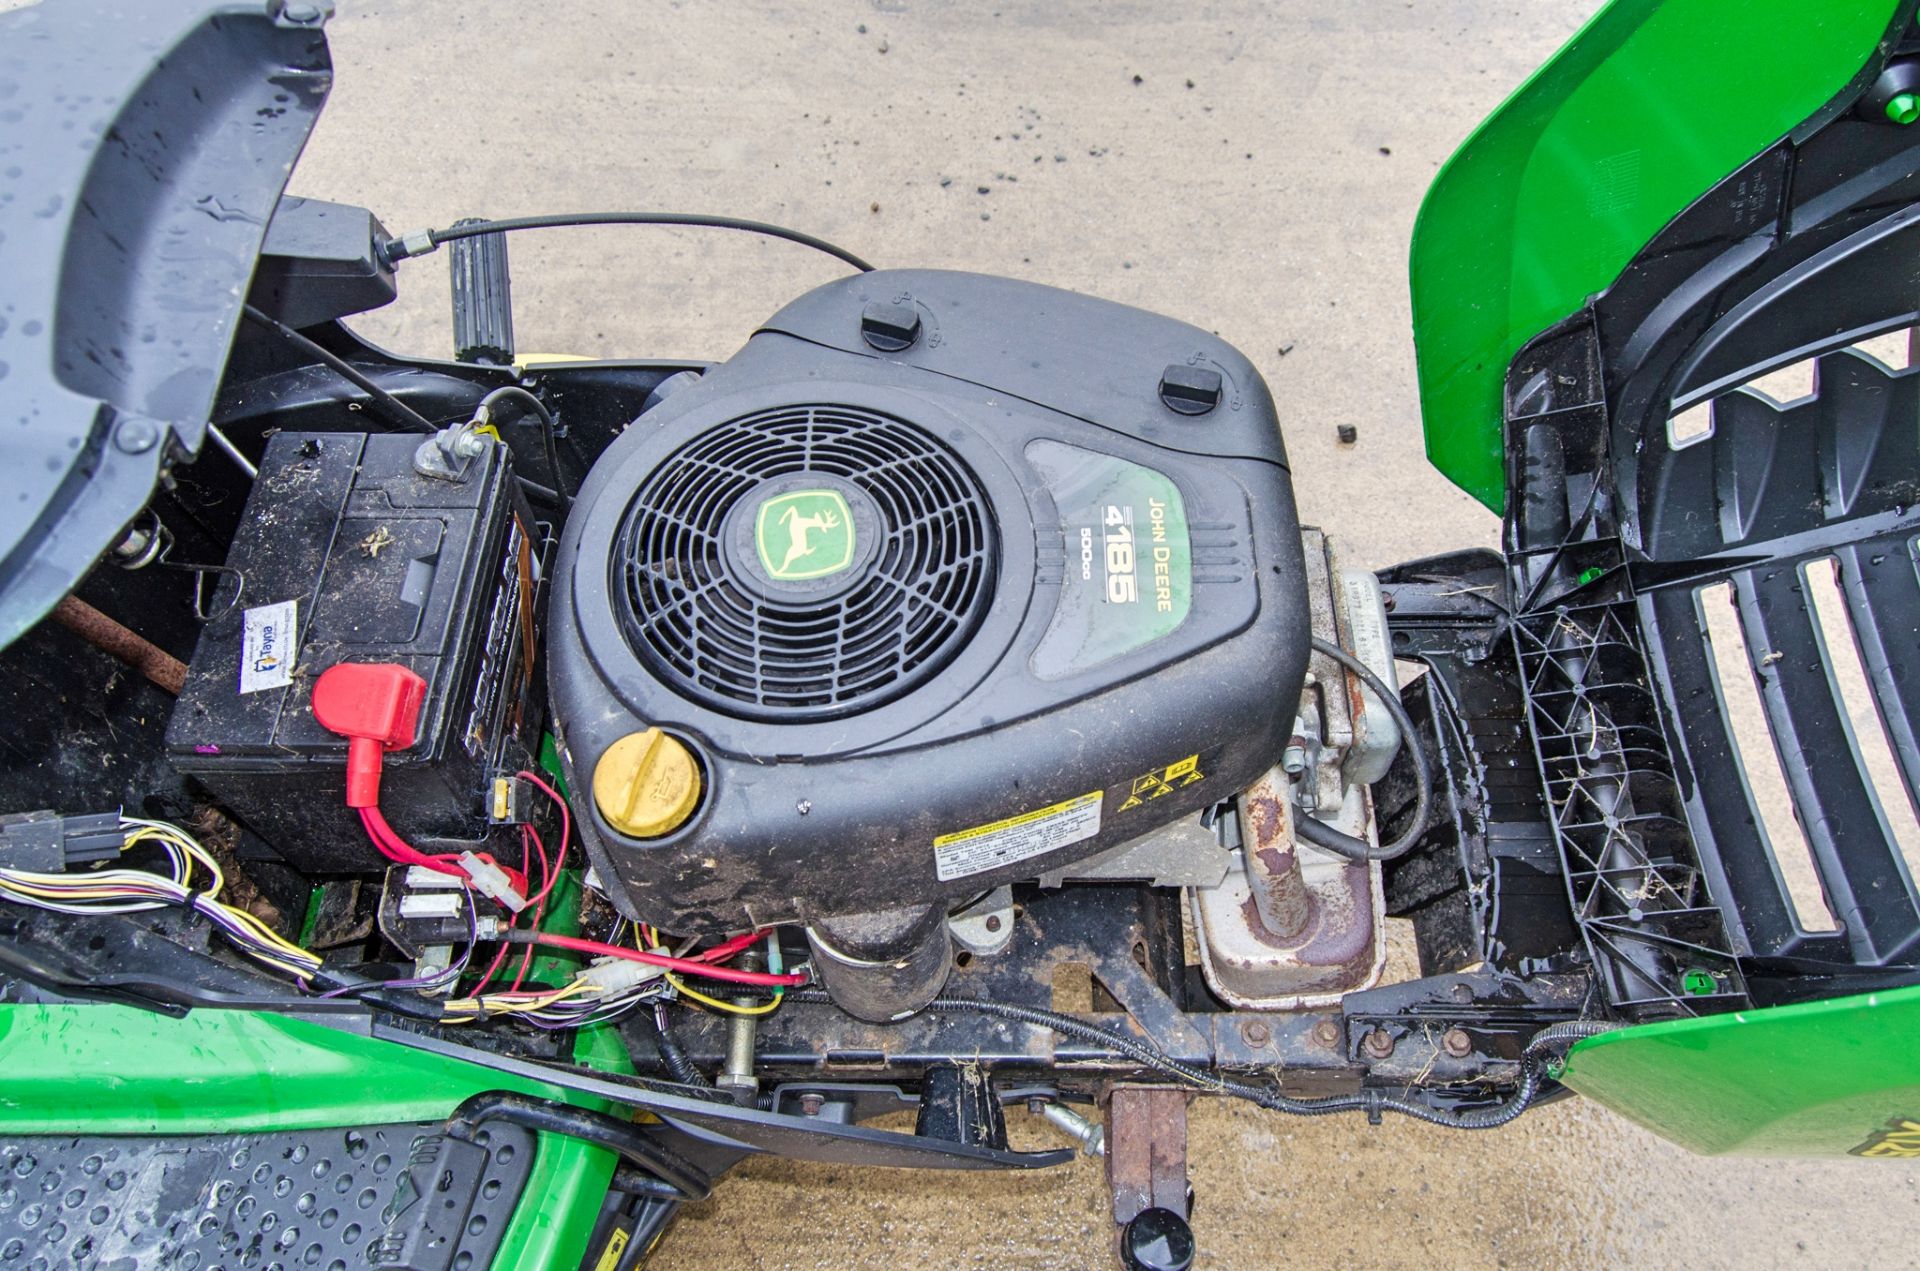 John Deere X125 petrol driven ride on mower Year: 2014 S/N: 100499 Recorded Hours: 41 - Image 12 of 14